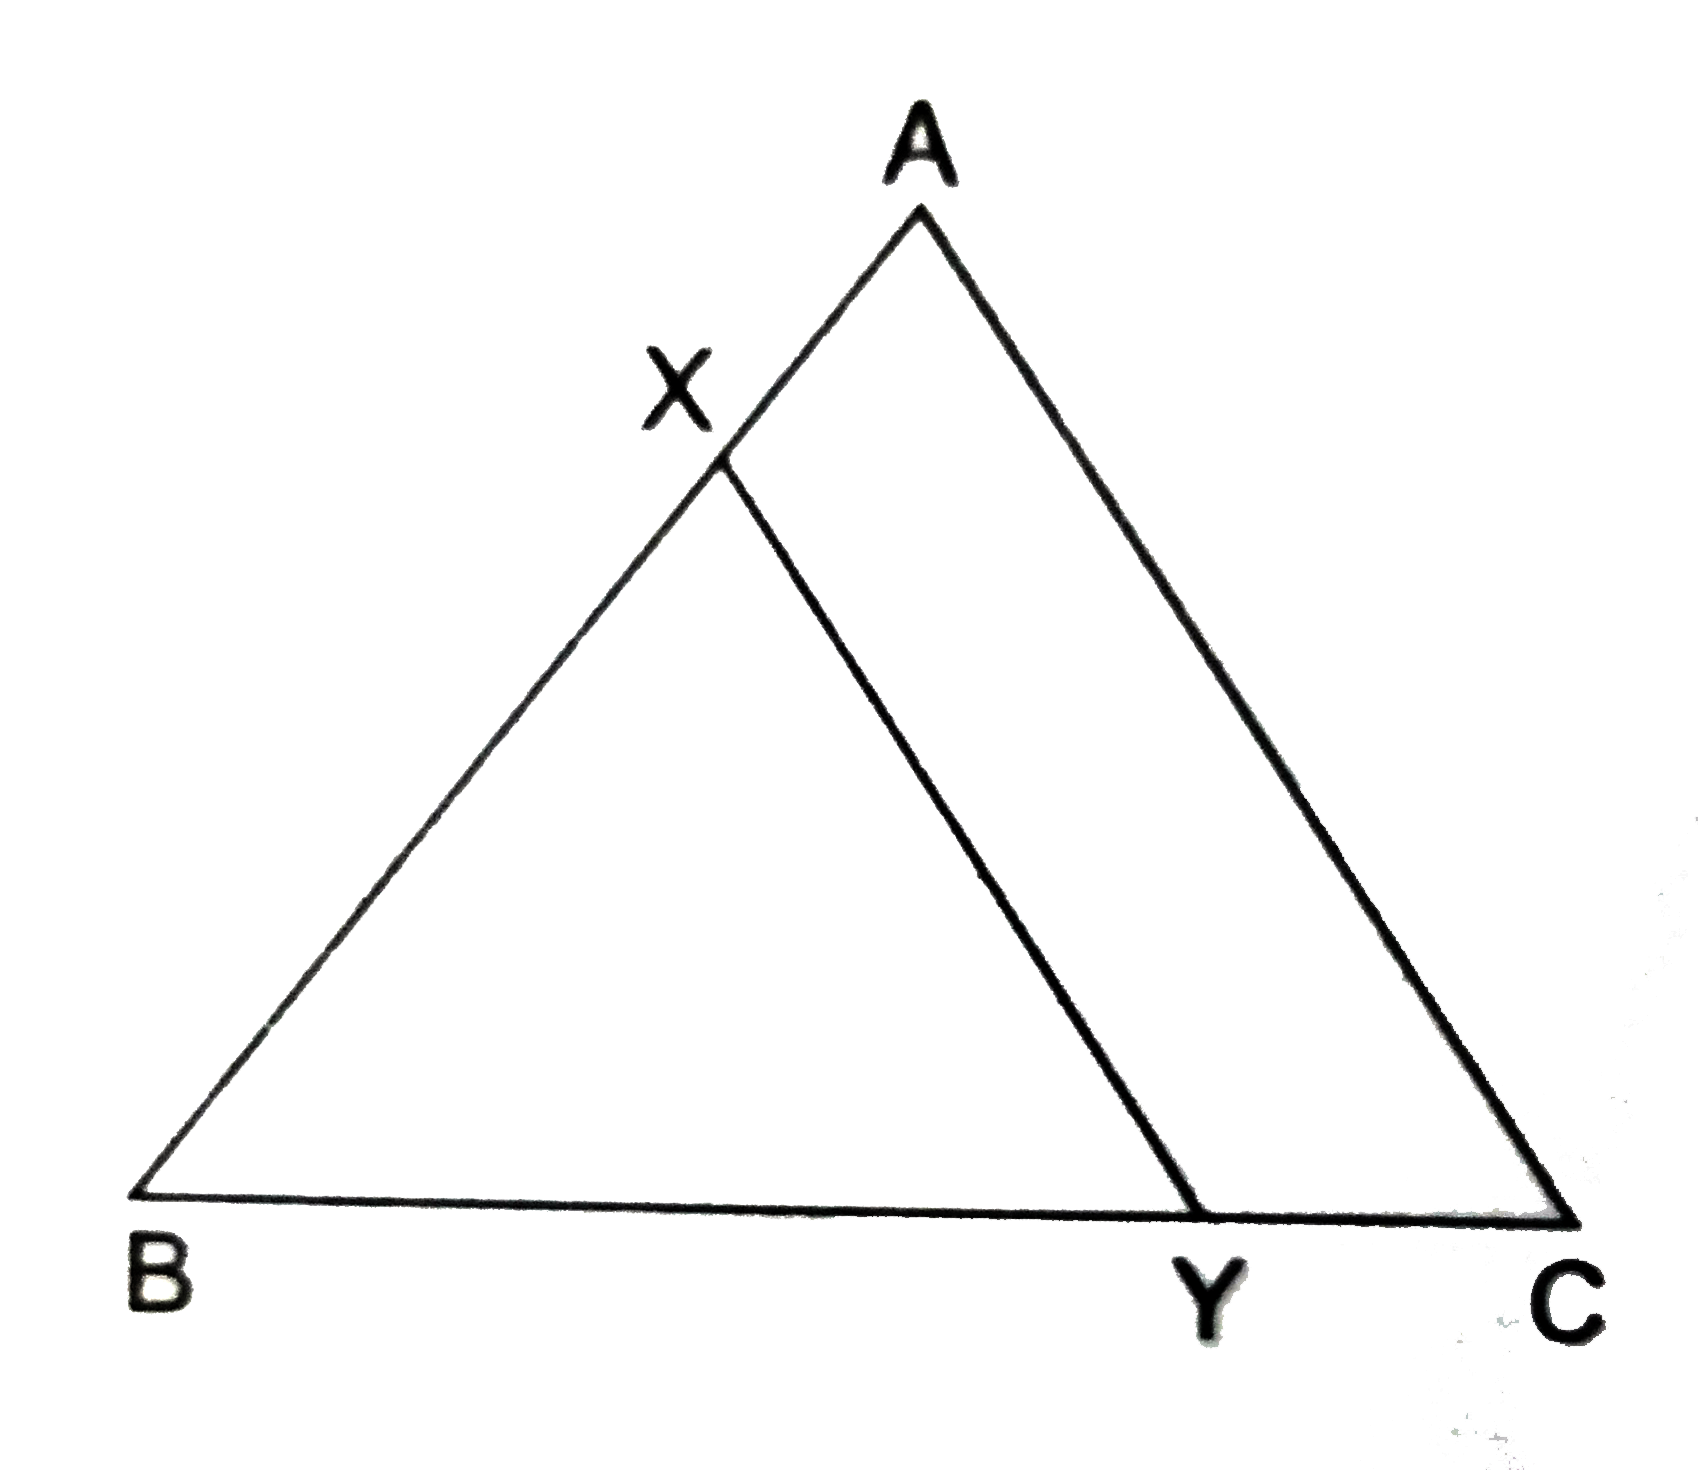 In the given figure, line the segment XY is parallel to side AC of Delta ABC and it divides the triangles into two parts of equal area. Prove that AX:AB=(2-sqrt(2)):2